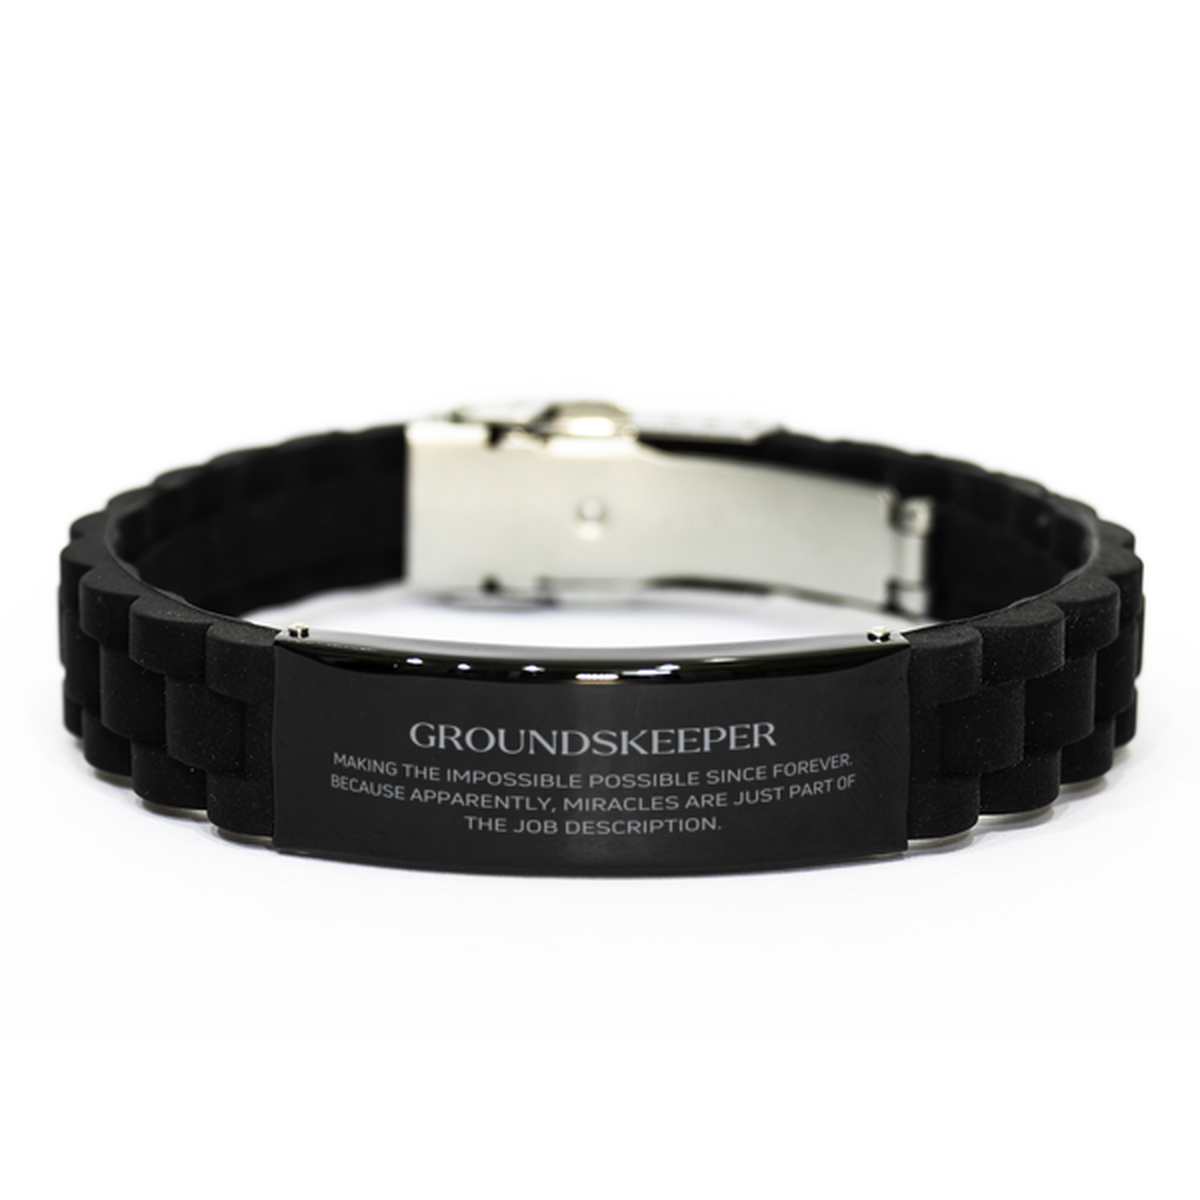 Funny Groundskeeper Gifts, Miracles are just part of the job description, Inspirational Birthday Black Glidelock Clasp Bracelet For Groundskeeper, Men, Women, Coworkers, Friends, Boss